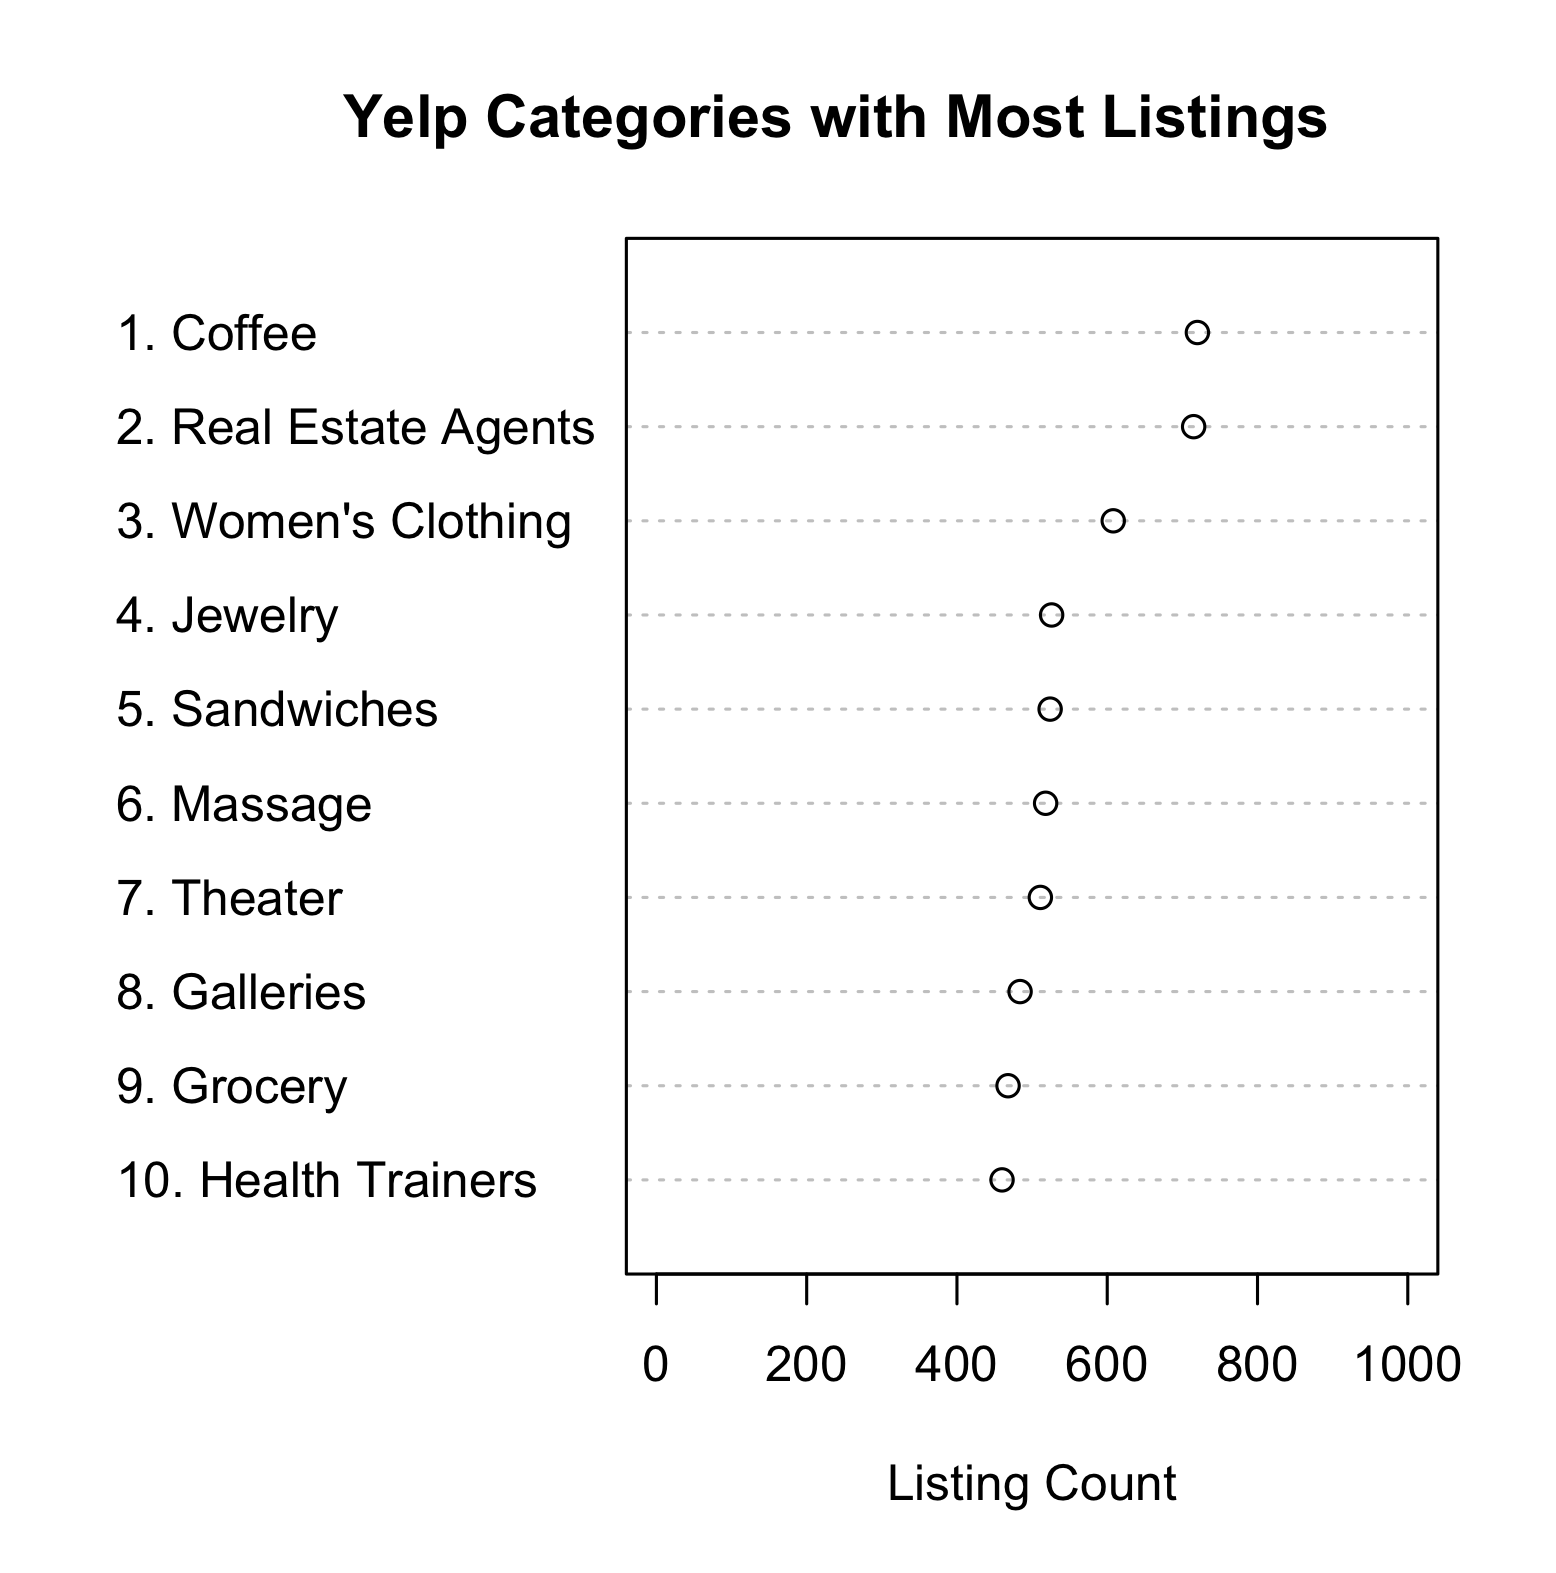 Yelp Categories with Most Listings